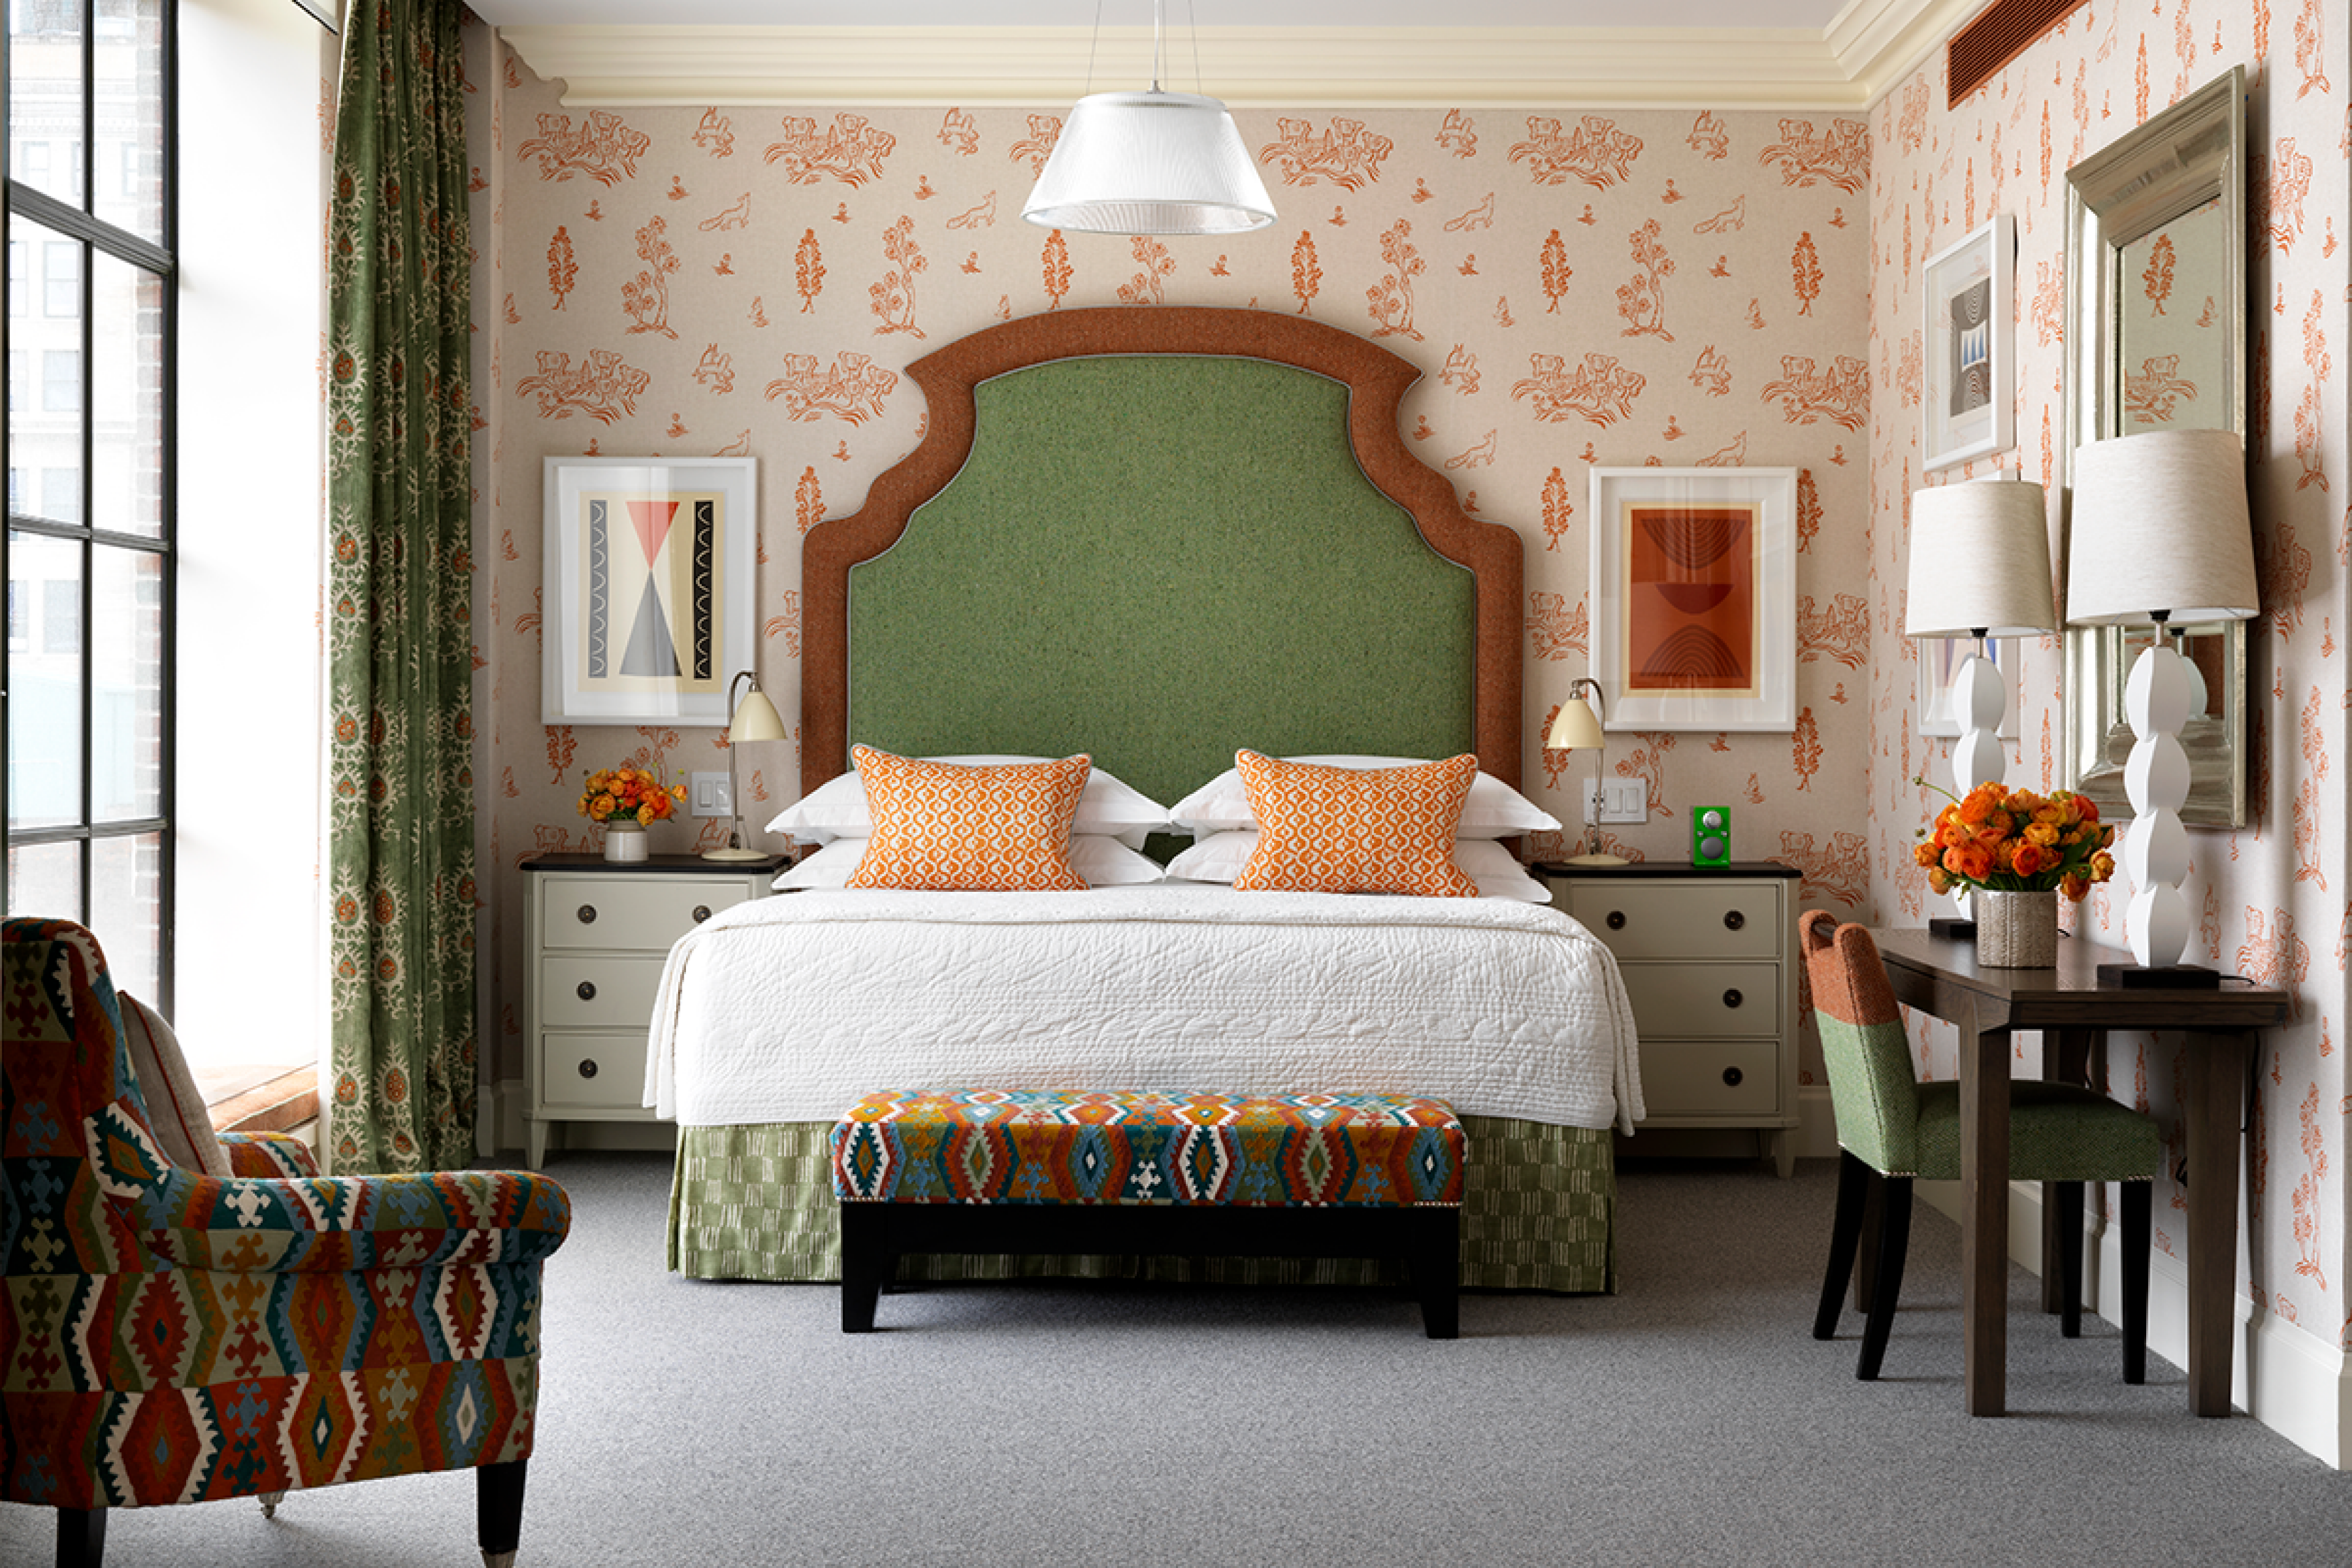 Colorful bedroom with orange wallpaper and pillows and large green headboard. Matching nightstands are on either side of bed and ottoman is at foot of bed